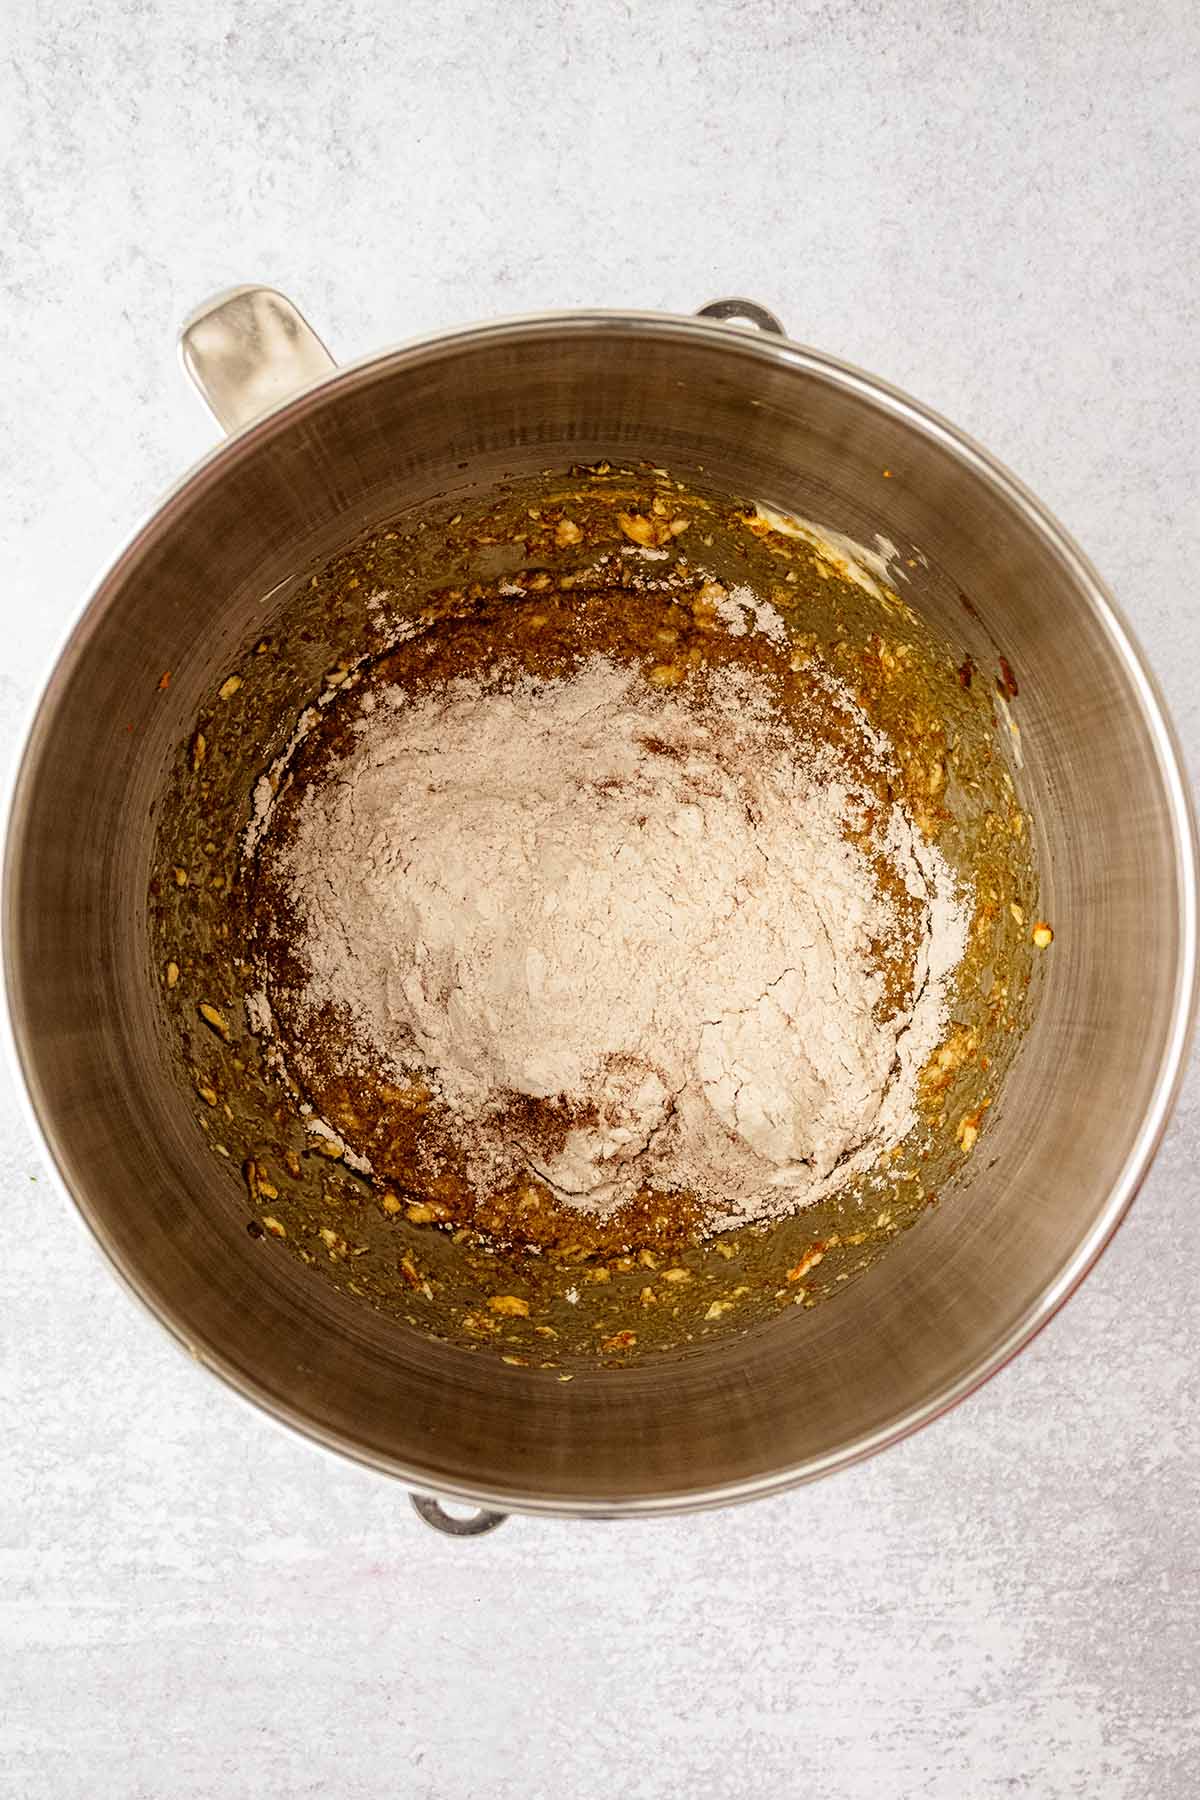 Dry mixture on top of wet mixture in a large metal mixing bowl.